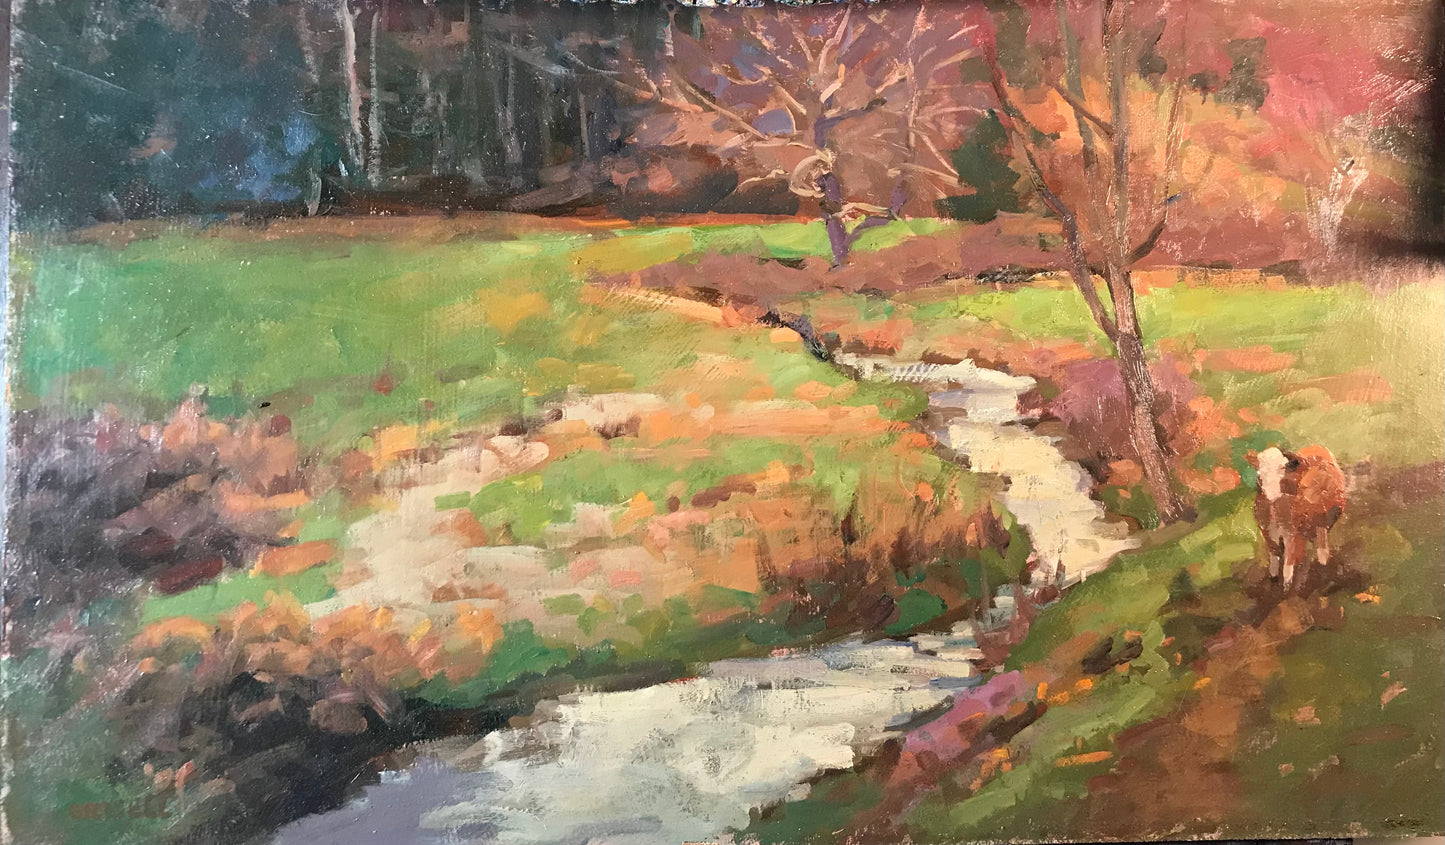 Hereford by the Brook (14 x 24 Inches)